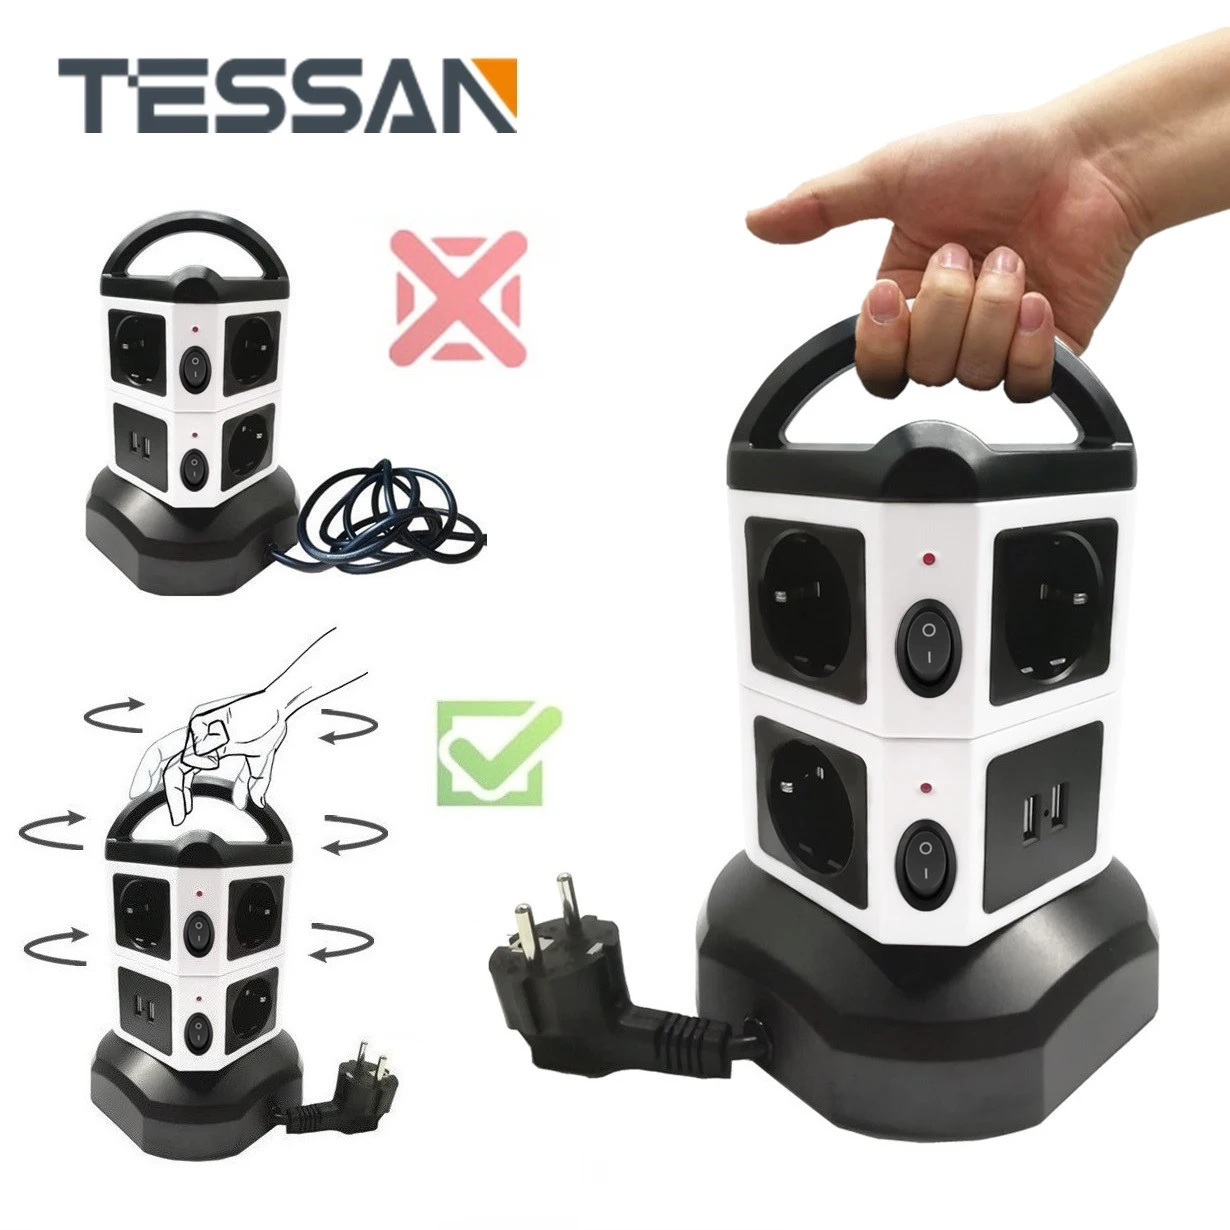 

TESSAN EU Multiple Plug Power Strip Vertical Tower Socket with 6/10/14 Outlets 4 USB Independent Switches 2M Cable for Home